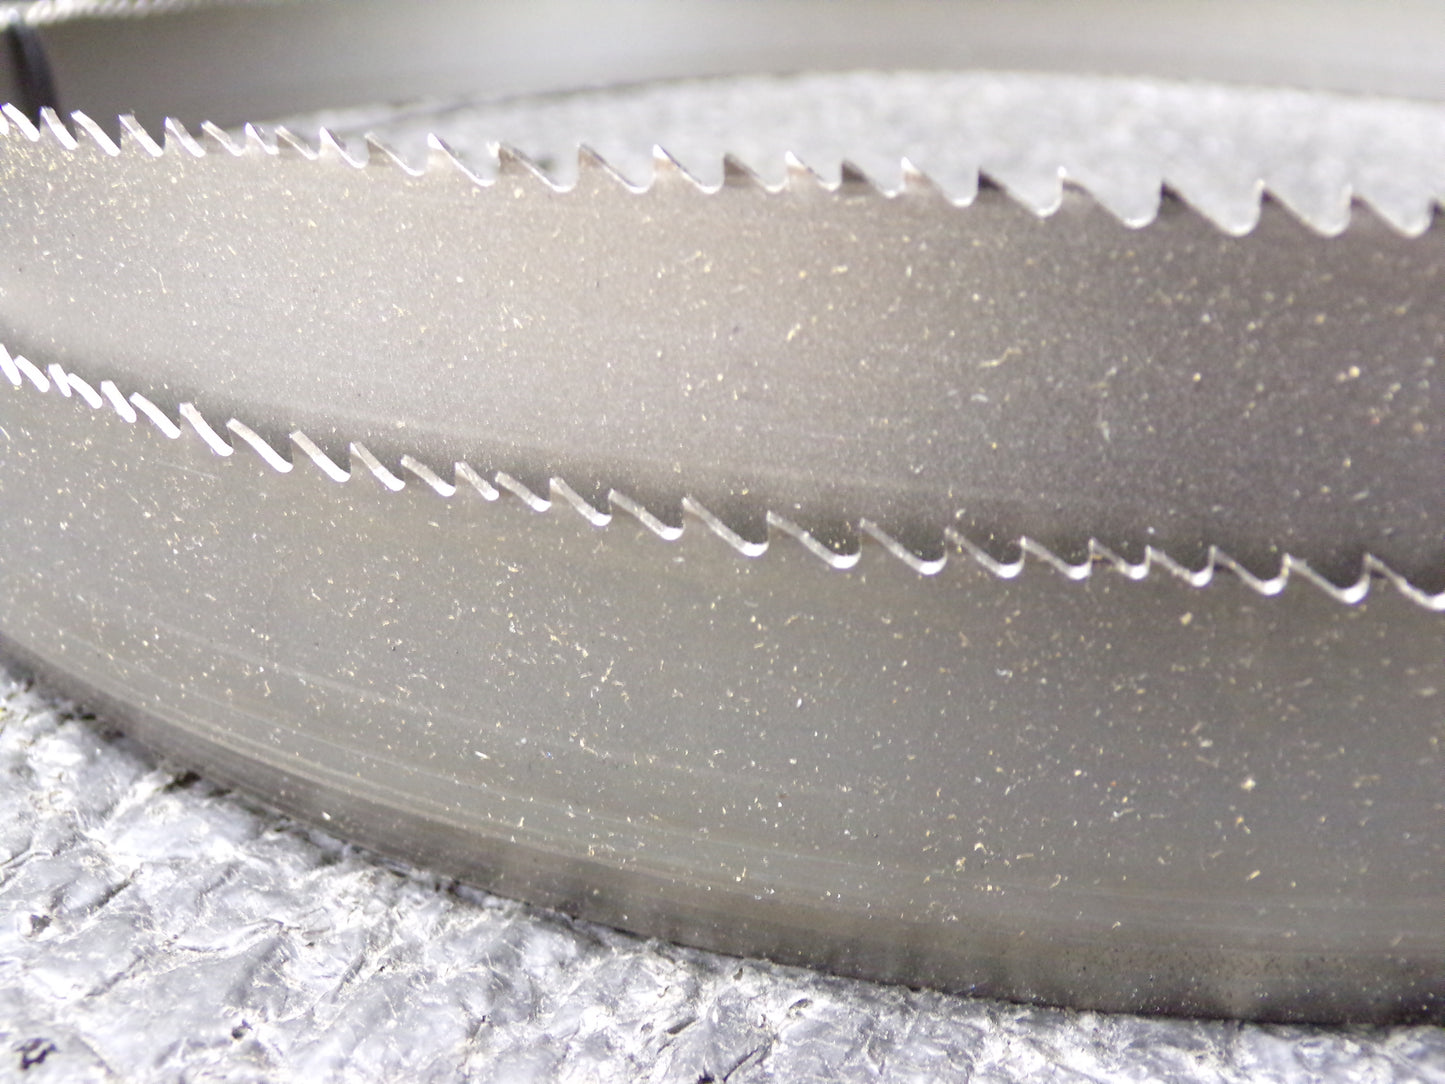 MORSE Band Saw Blade, 1 in Blade Width, 10 ft 10-1/2 in Blade Length, 5/8 Teeth per Inch (CR00249-BT05)